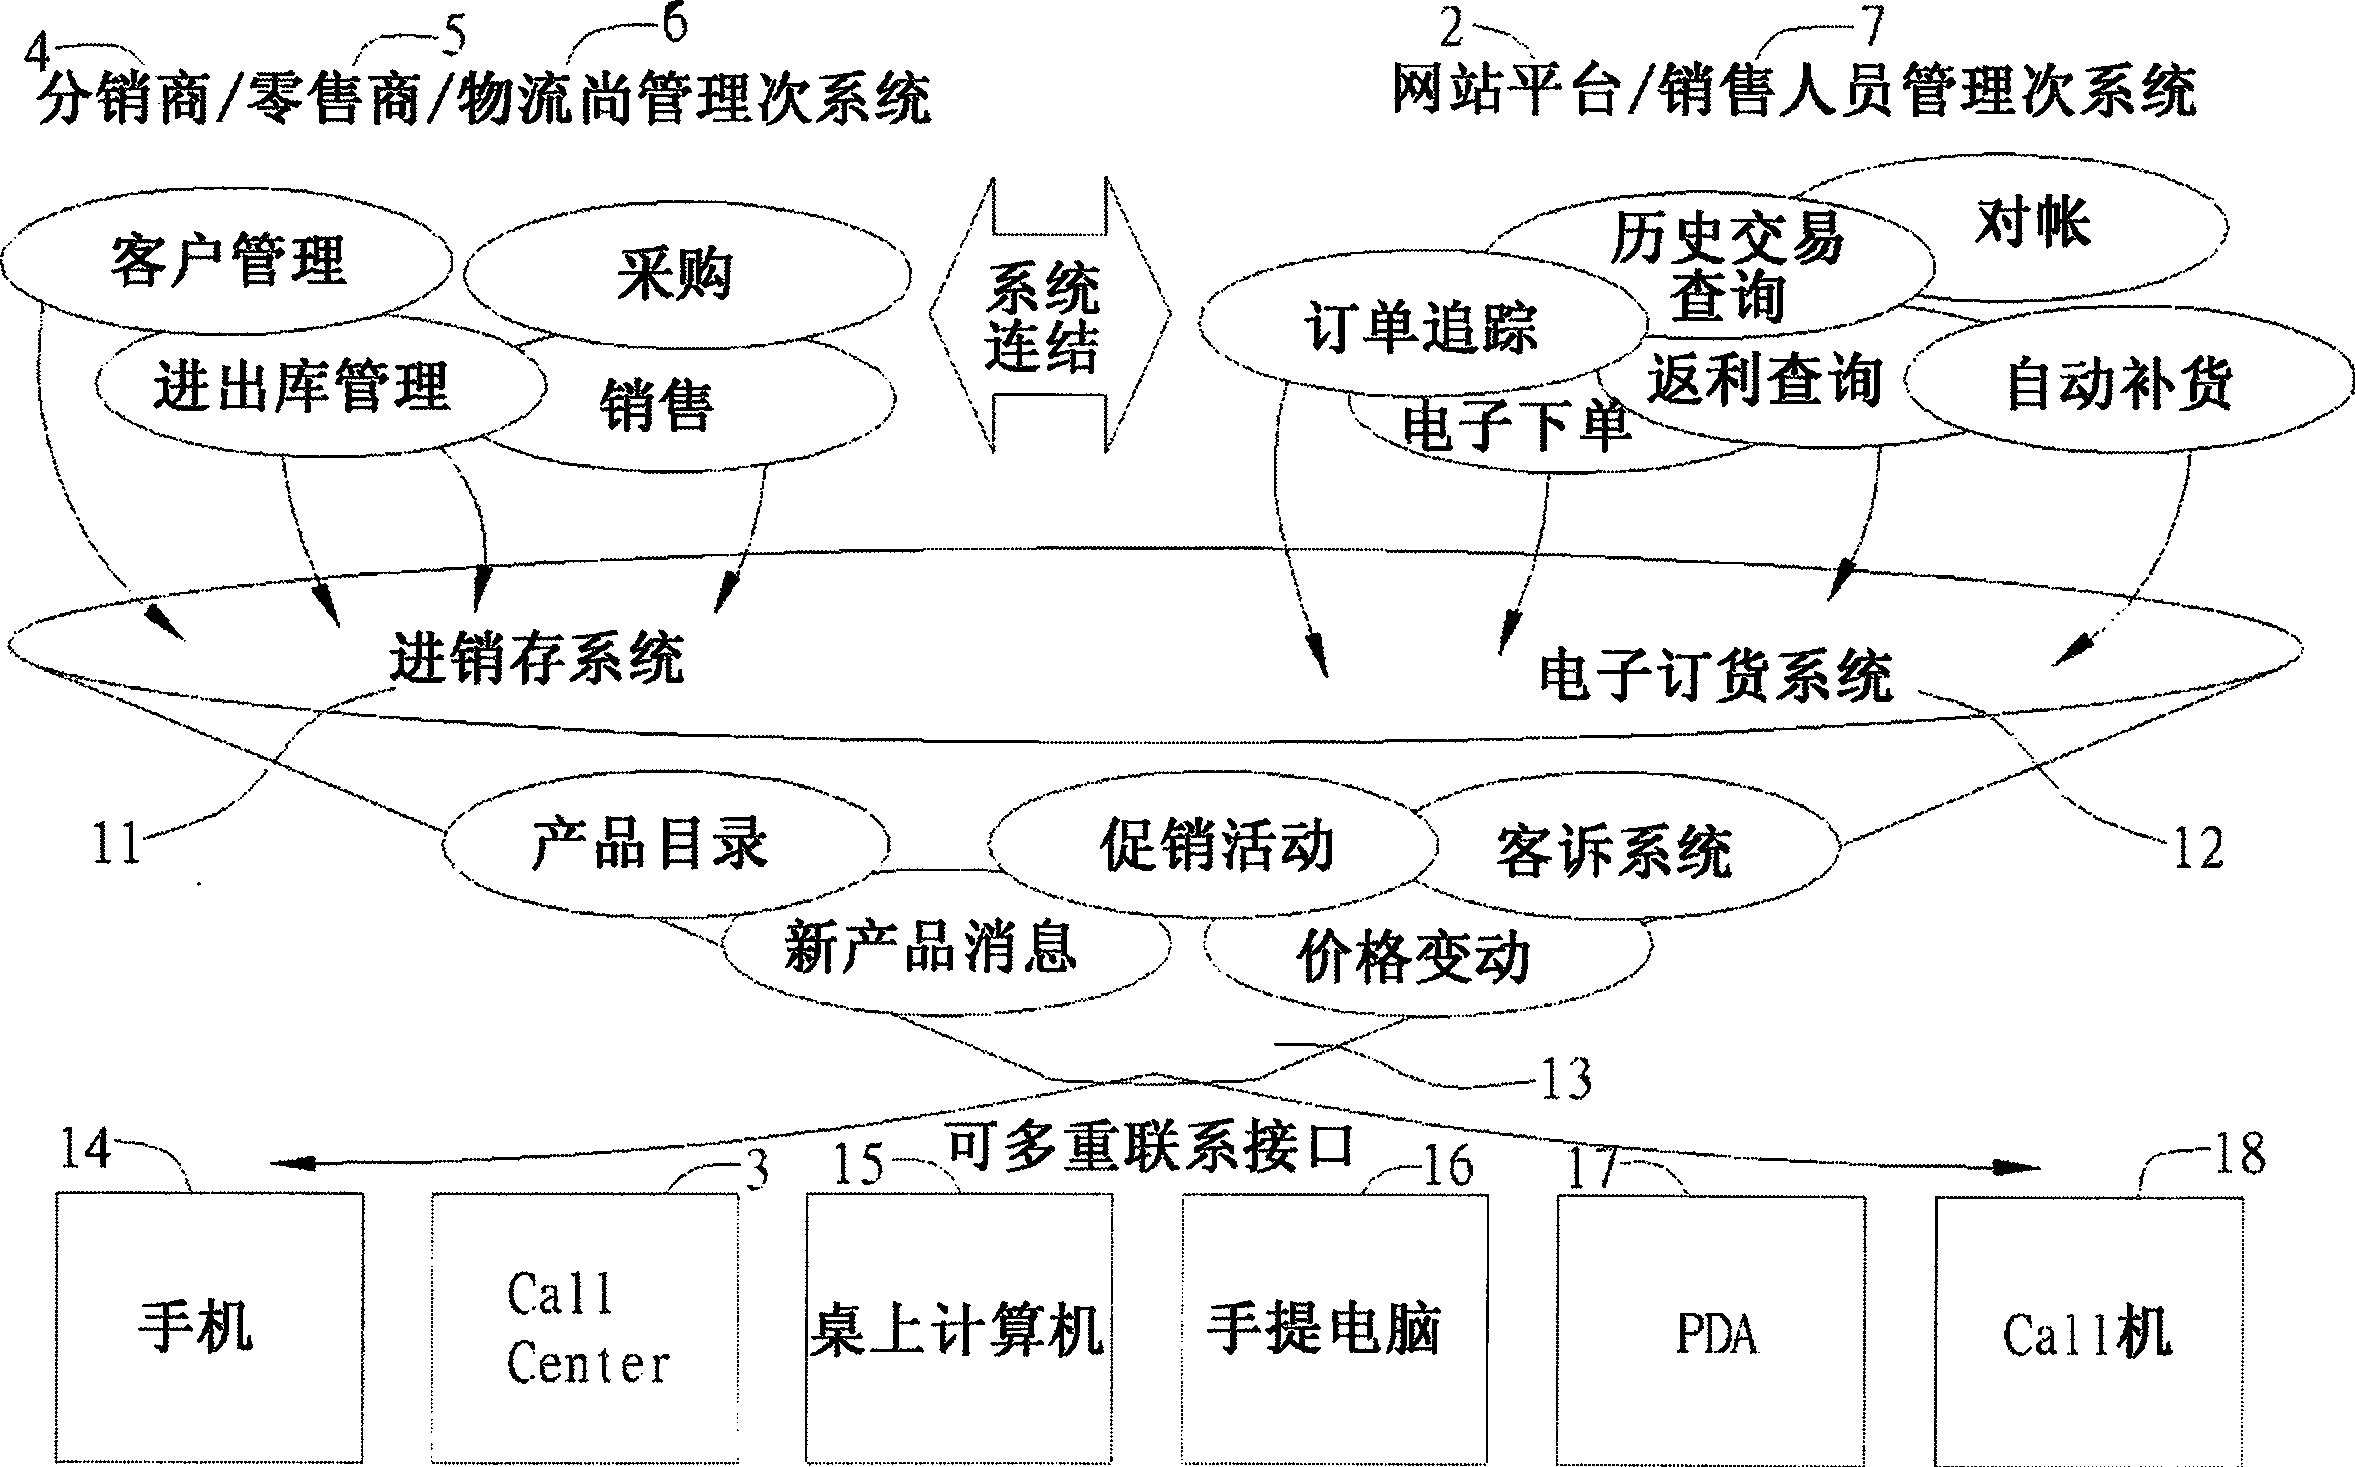 Integrated system and method of distribution and management